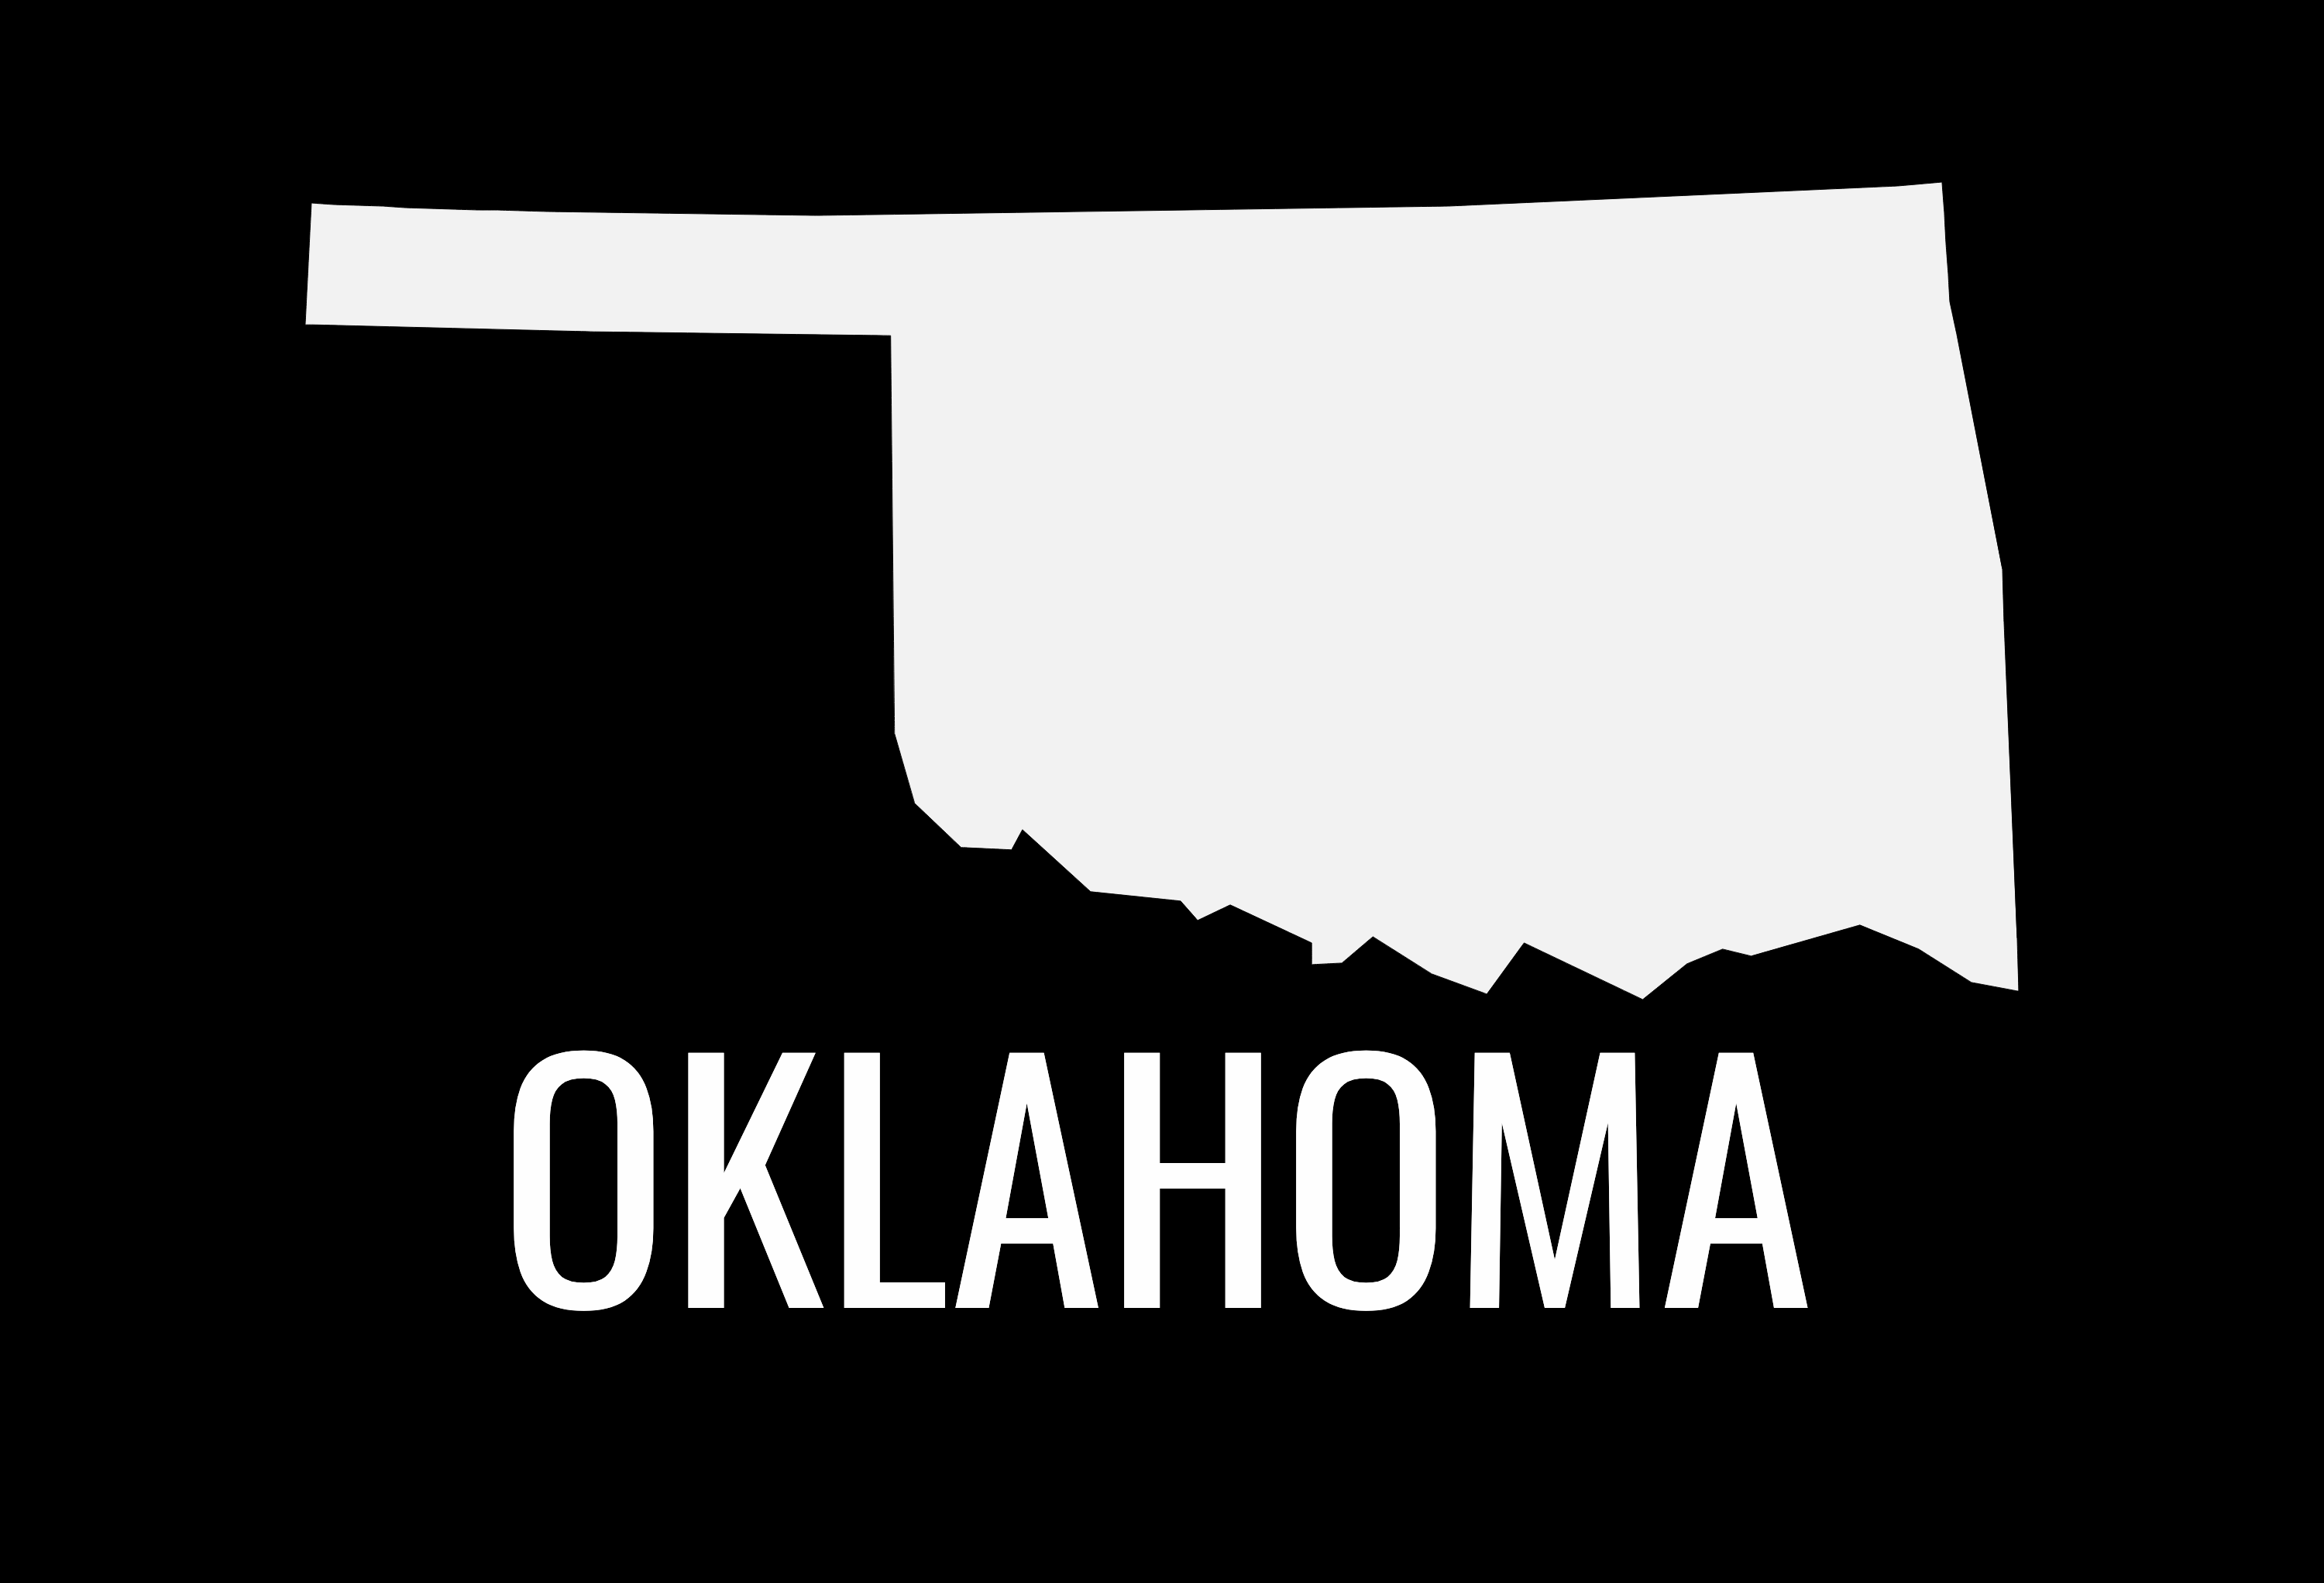 Oklahoma State Map Car Decal - Permanent Vinyl Sticker for Cars, Vehicle, Doors, Windows, Laptop, and more!